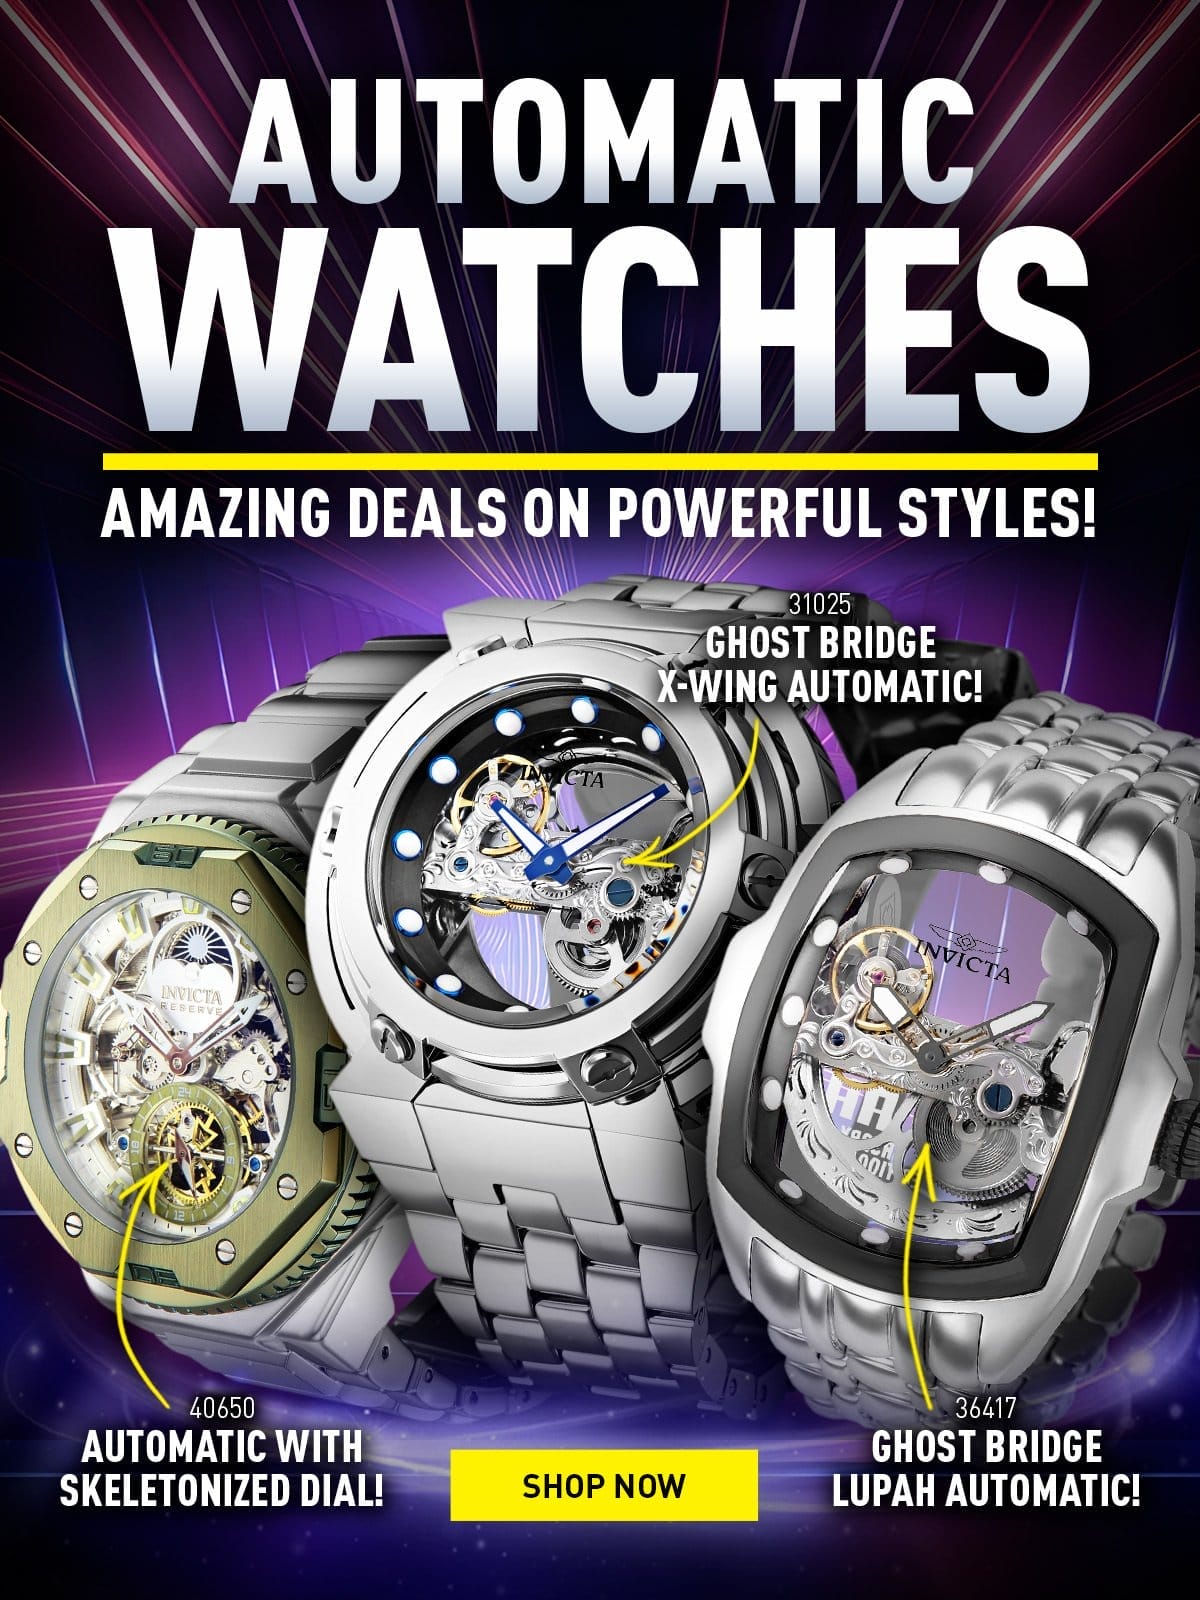 Automatic Watches - Amazing deals on powerful styles!